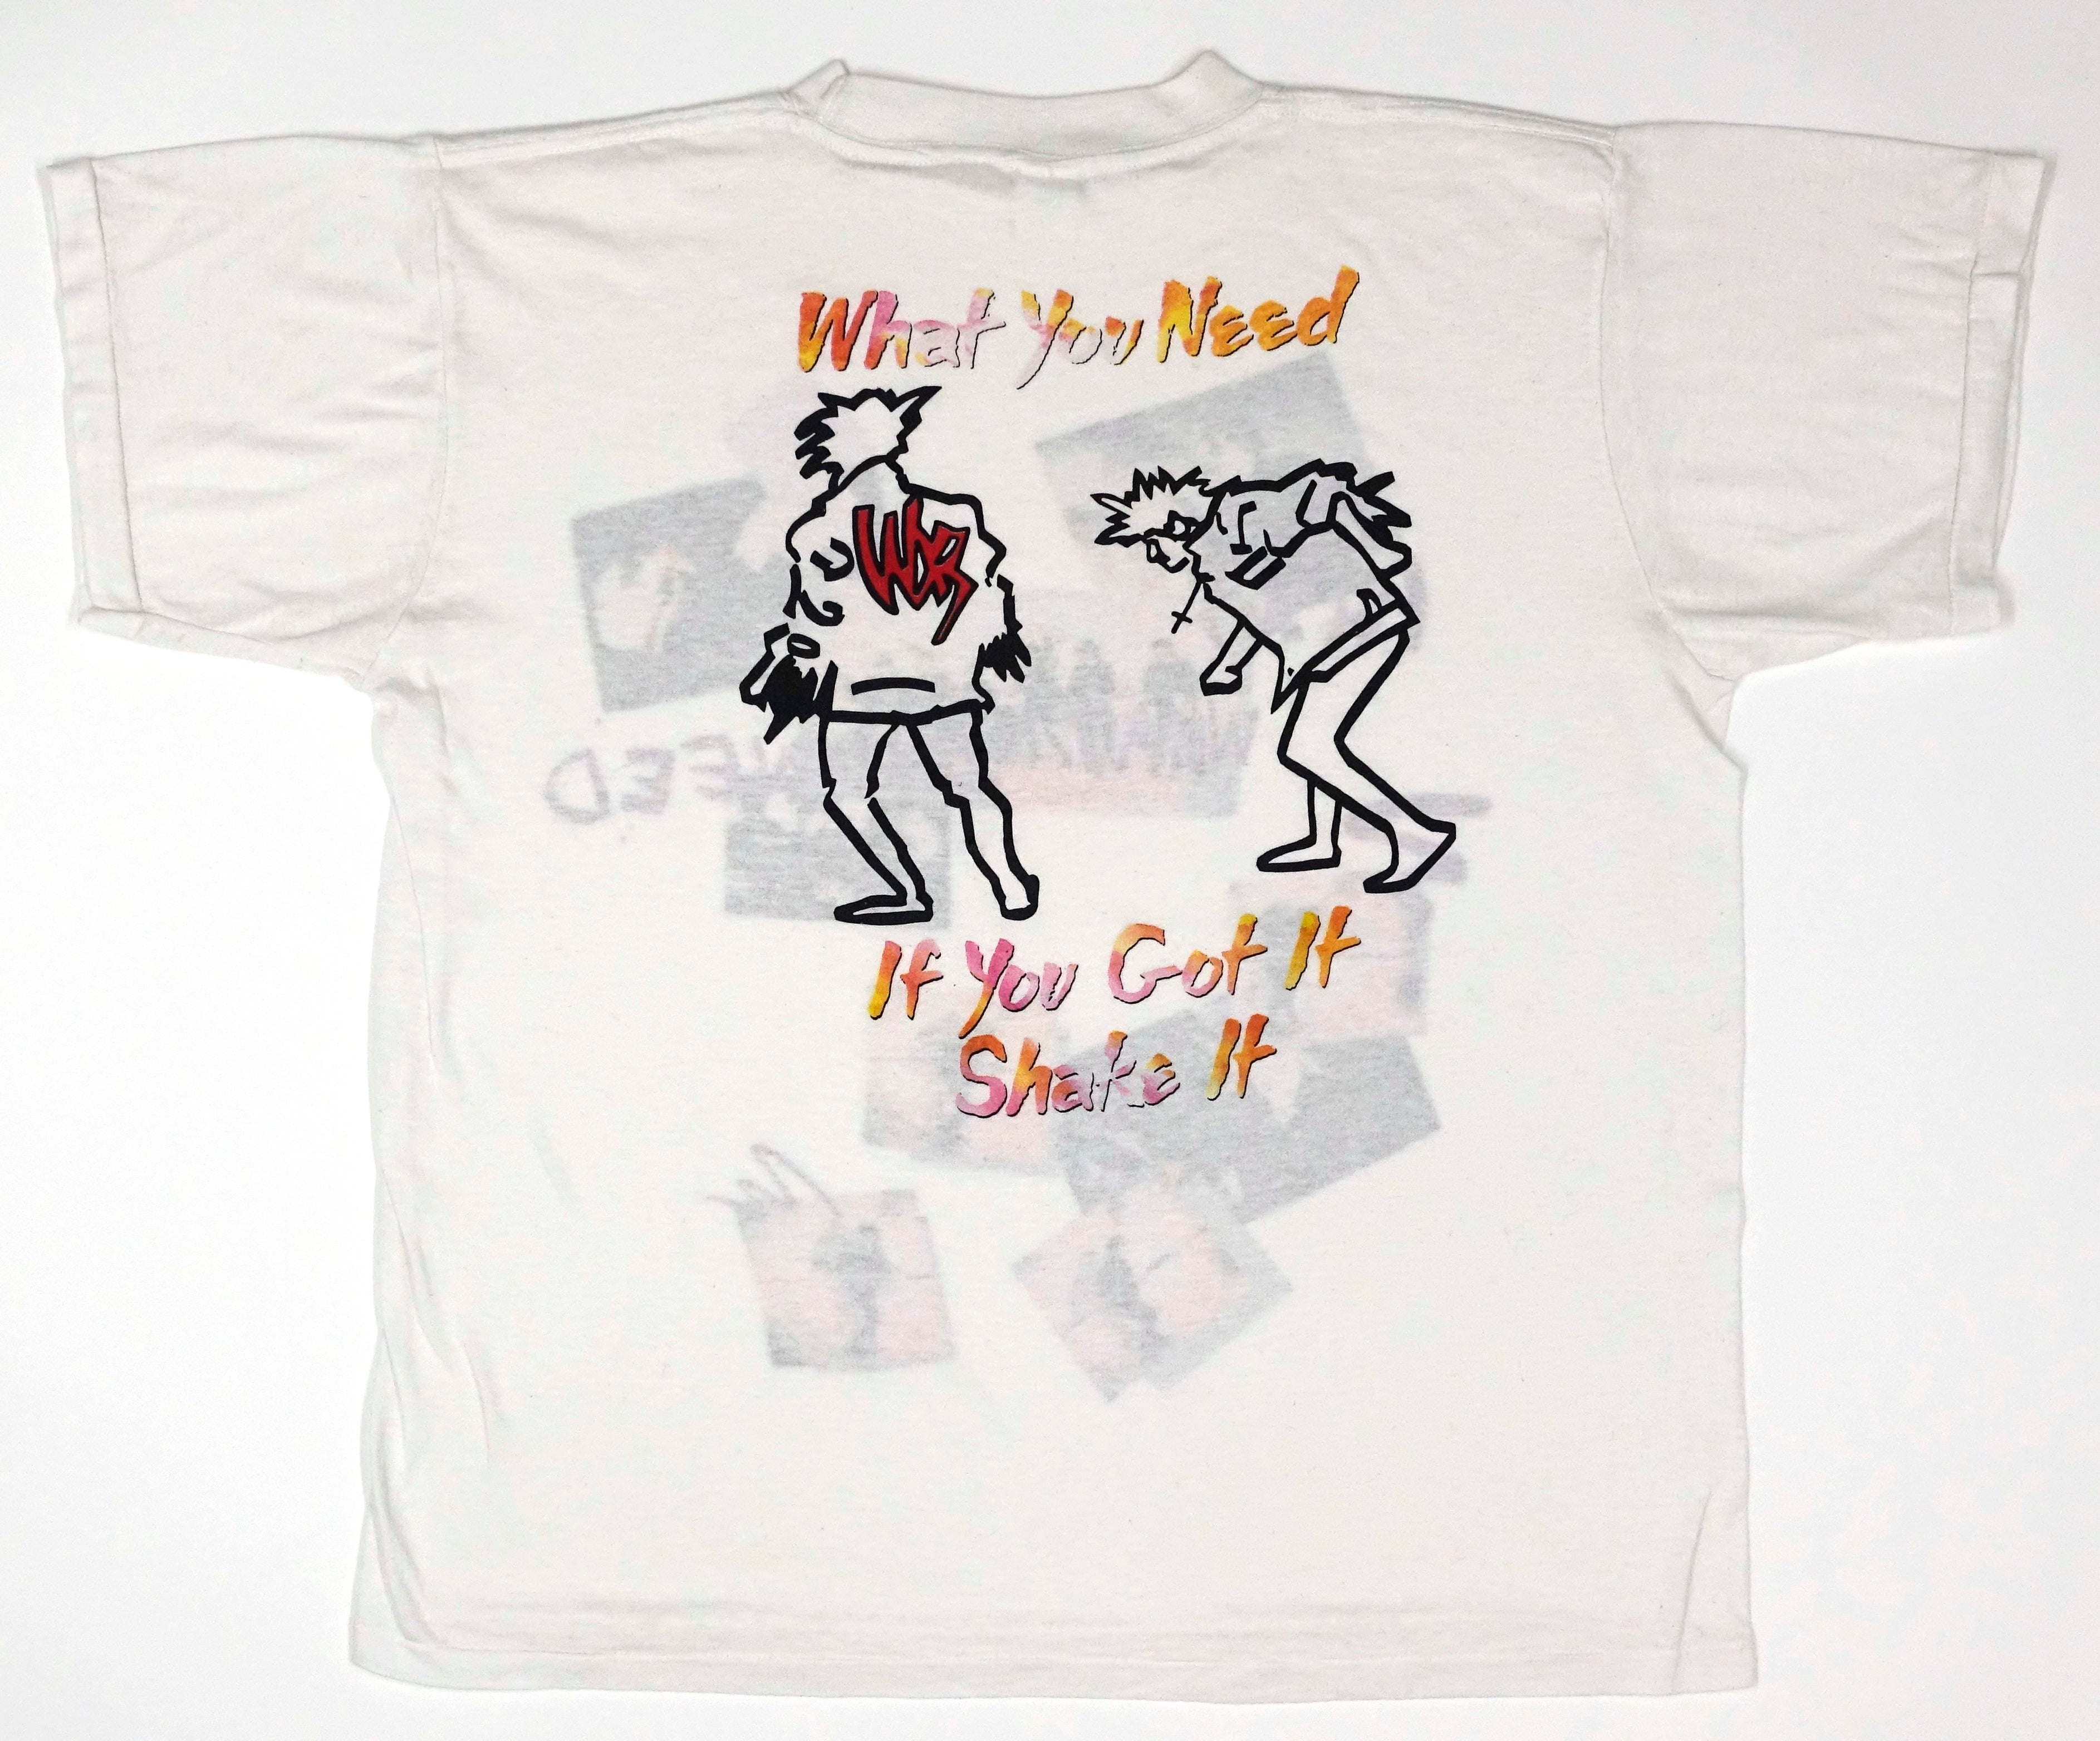 INXS - What You Need / Listen Like Thieves 1985 Tour 50/50 Shirt Size XL